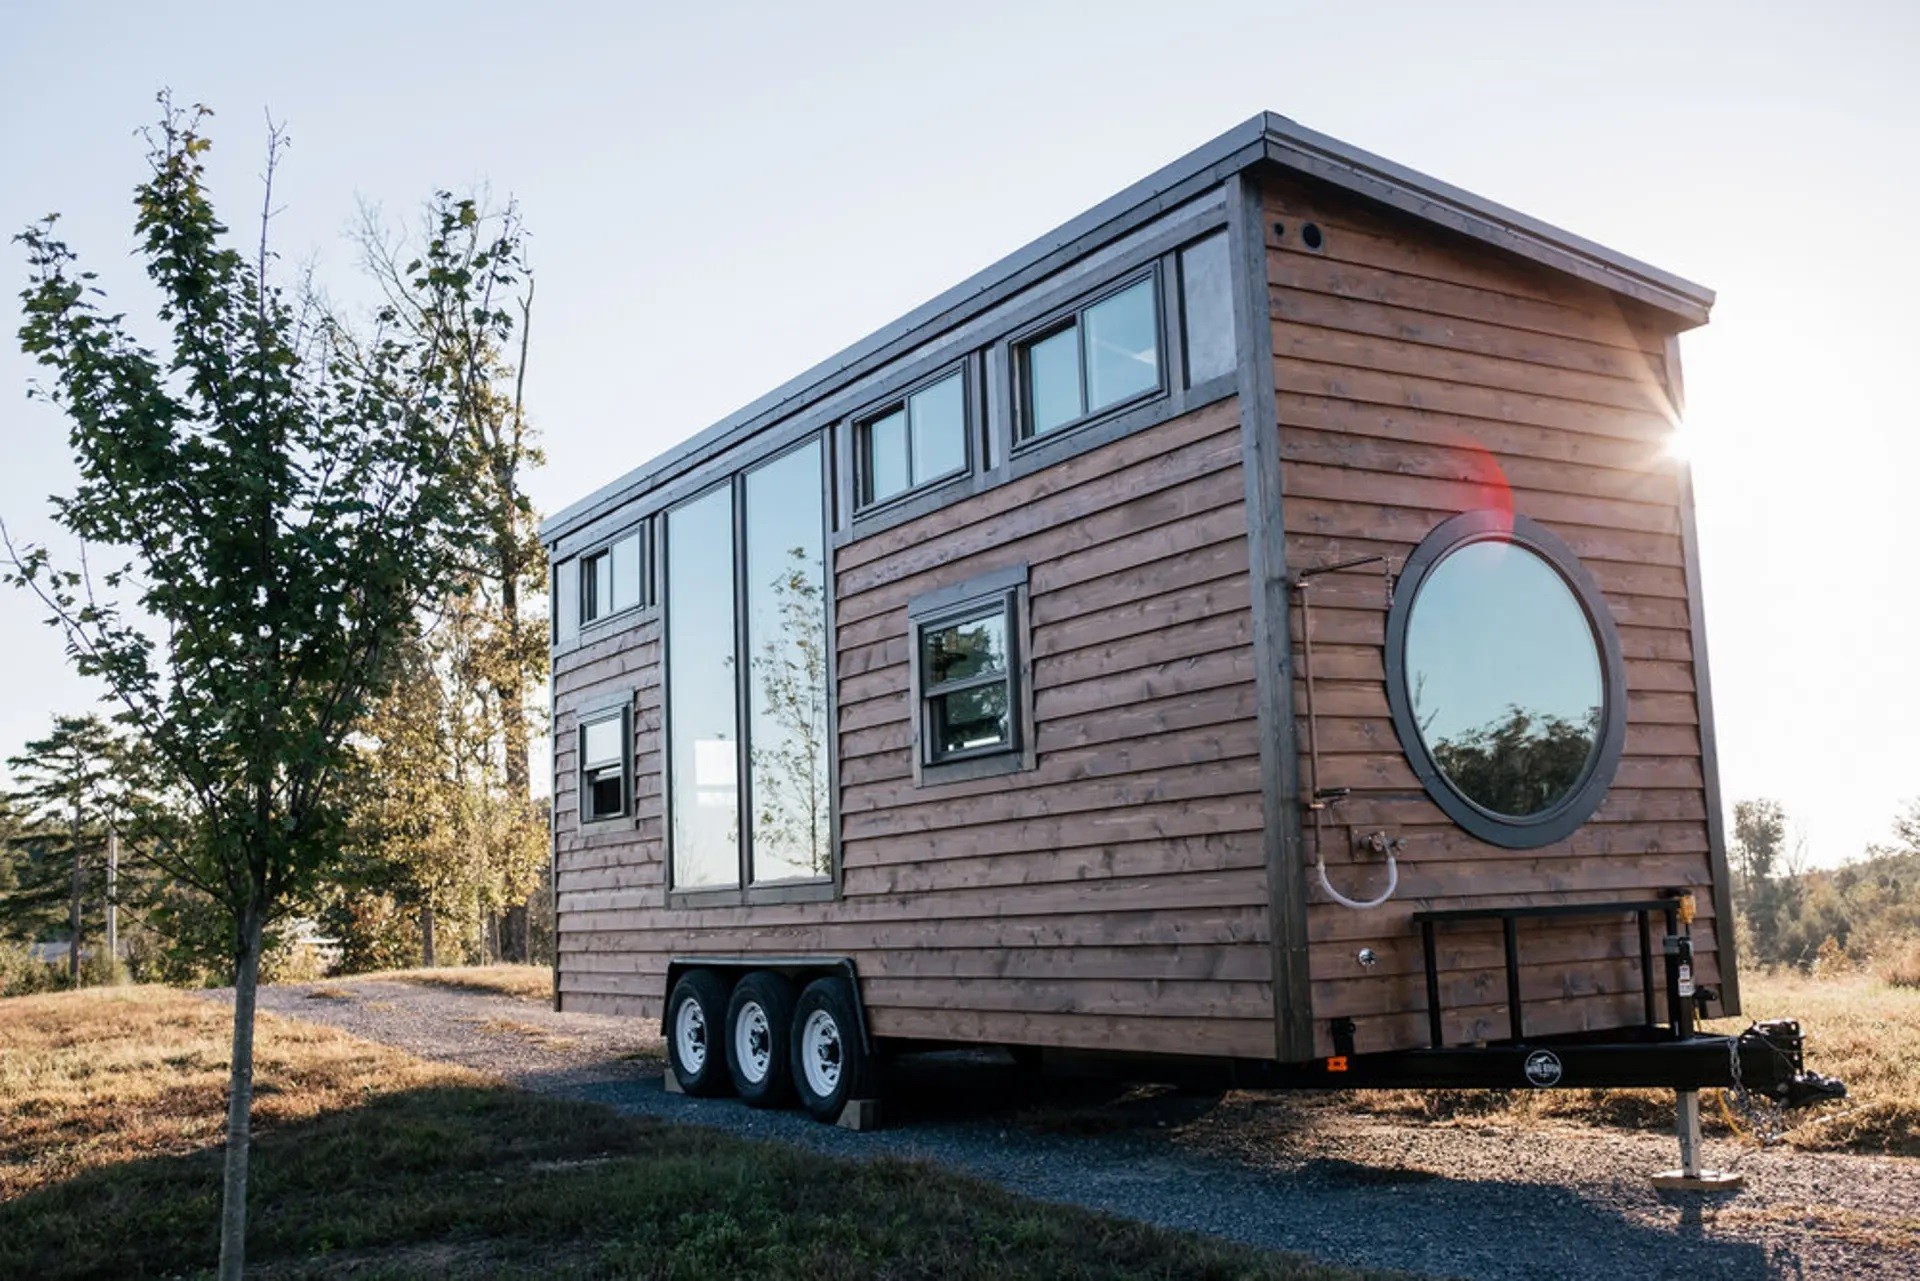 https://s1.cdn.autoevolution.com/images/news/gallery/the-silhouette-is-an-ingenious-tiny-home-that-would-make-any-athlete-happy_2.jpg